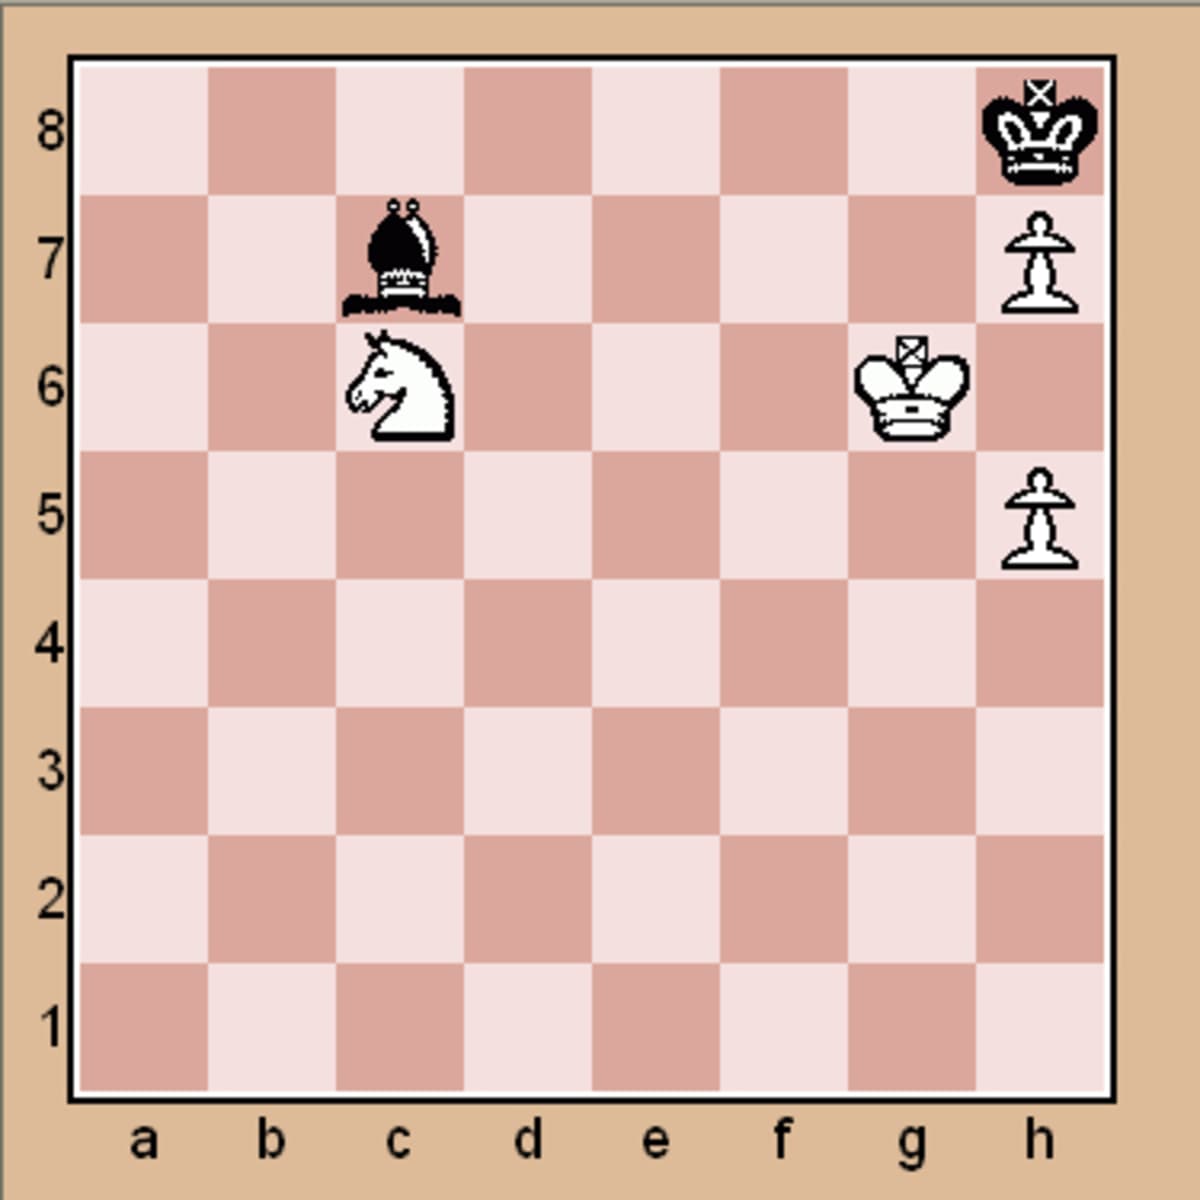 Chess puzzle  Chess puzzles, Chess strategies, Chess club